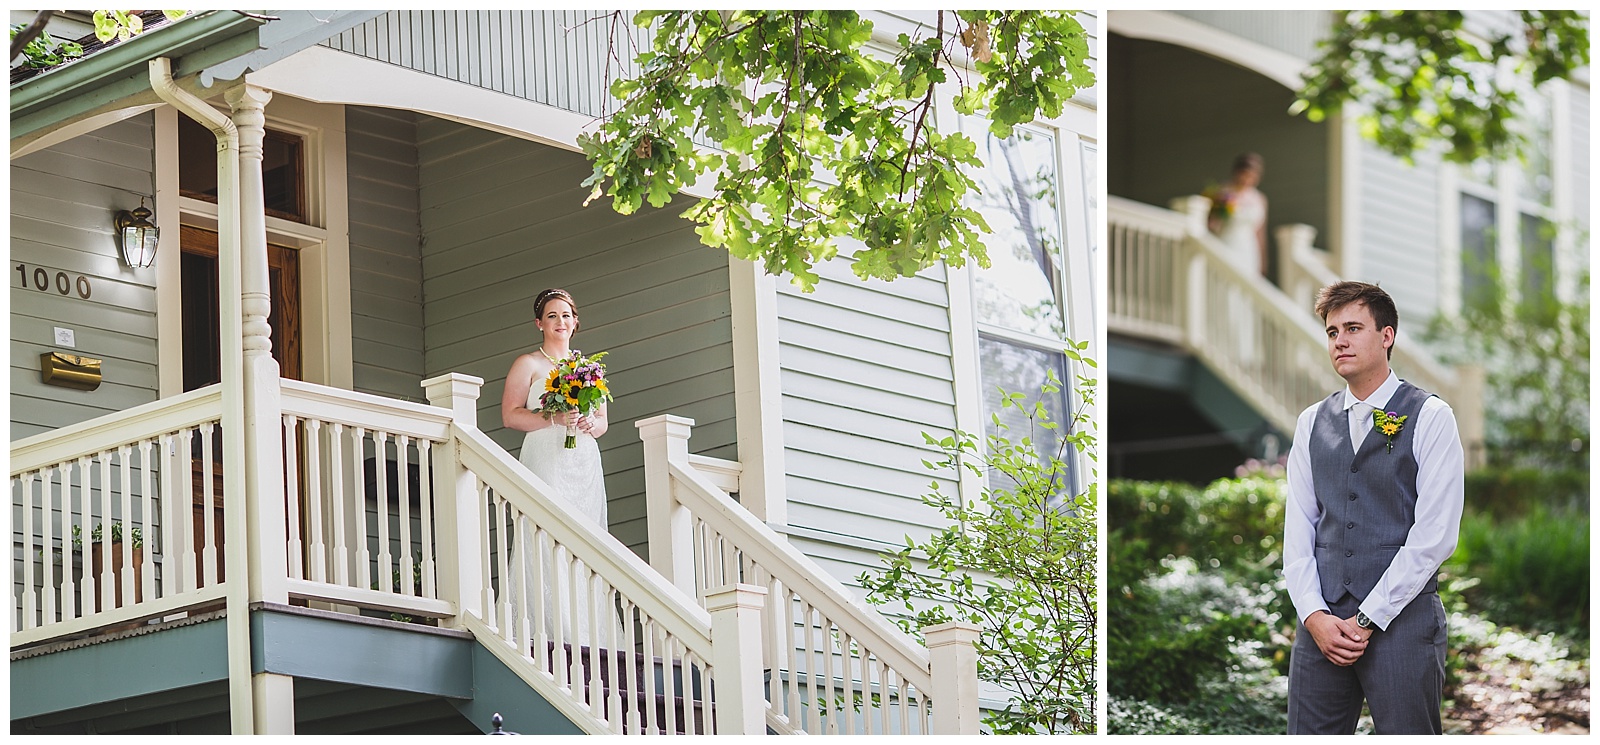 Wedding photography at The Halcyon House in Lawrence, Kansas.